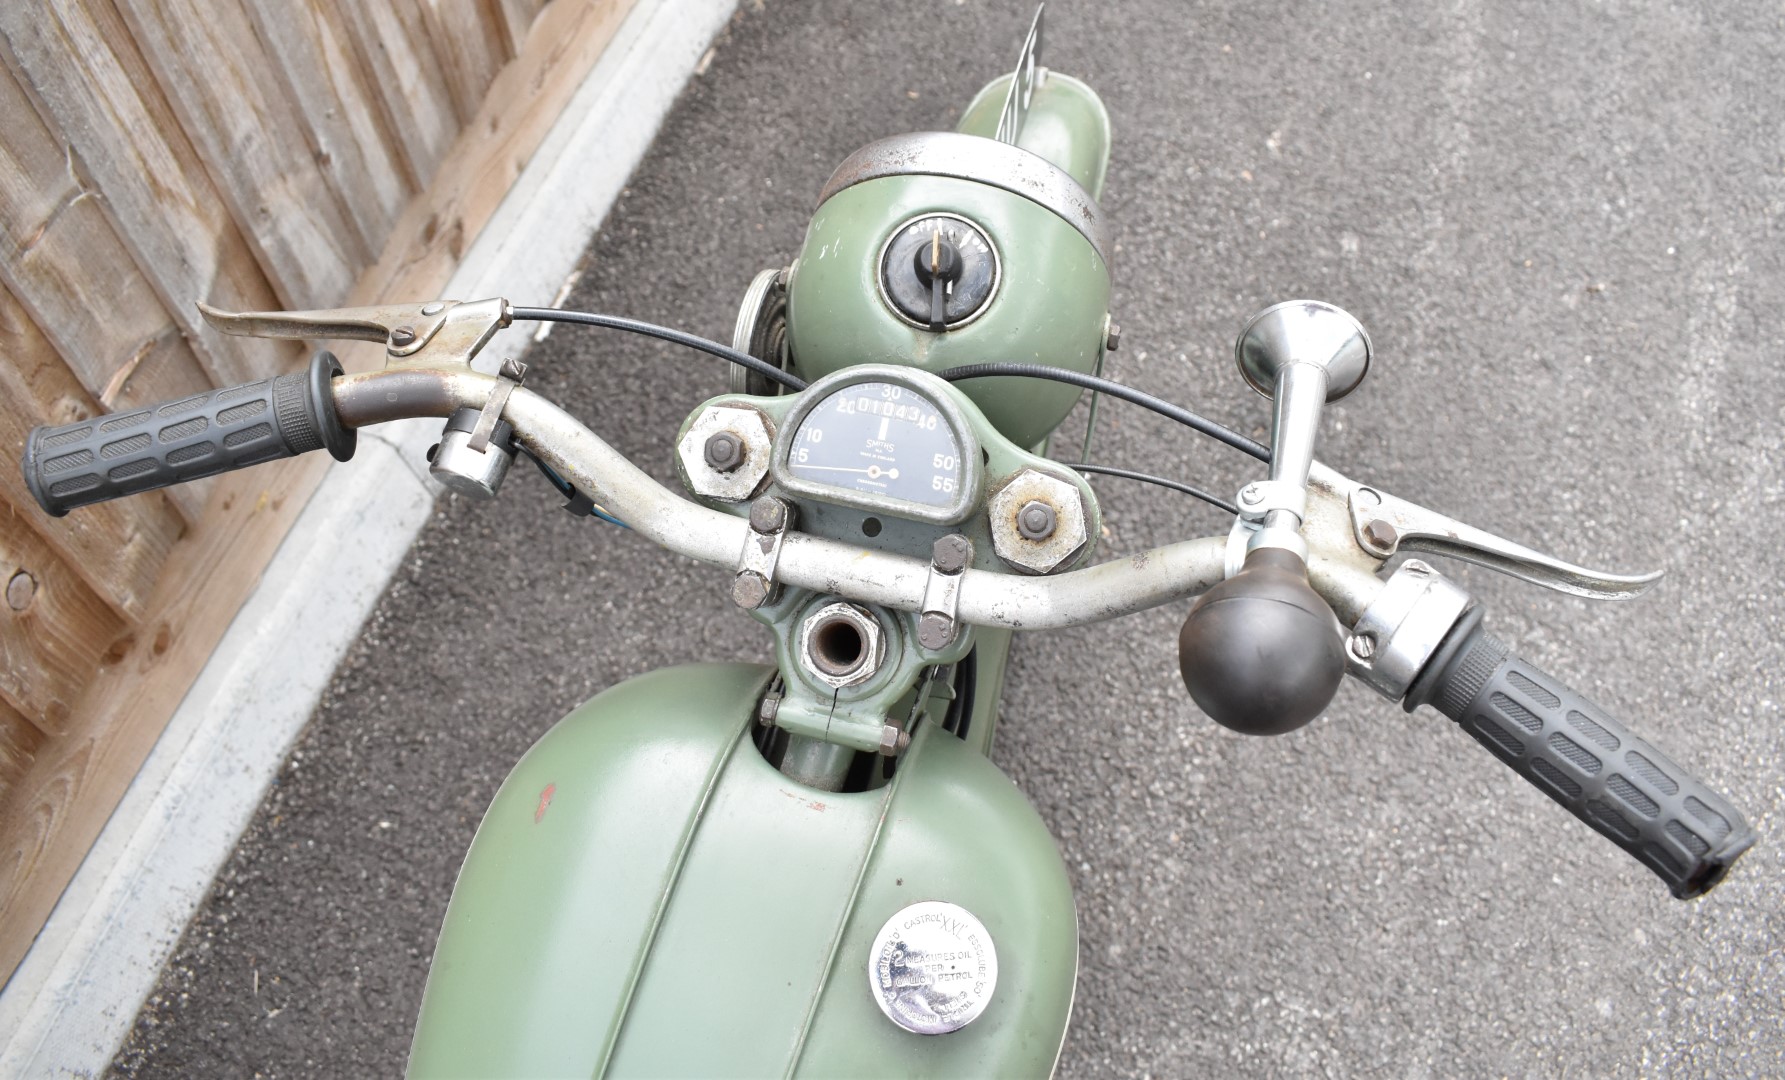 1952 BSA Bantam D1 125cc two stroke plunger motorbike, transferable registration number PHU 5,  with - Image 7 of 15